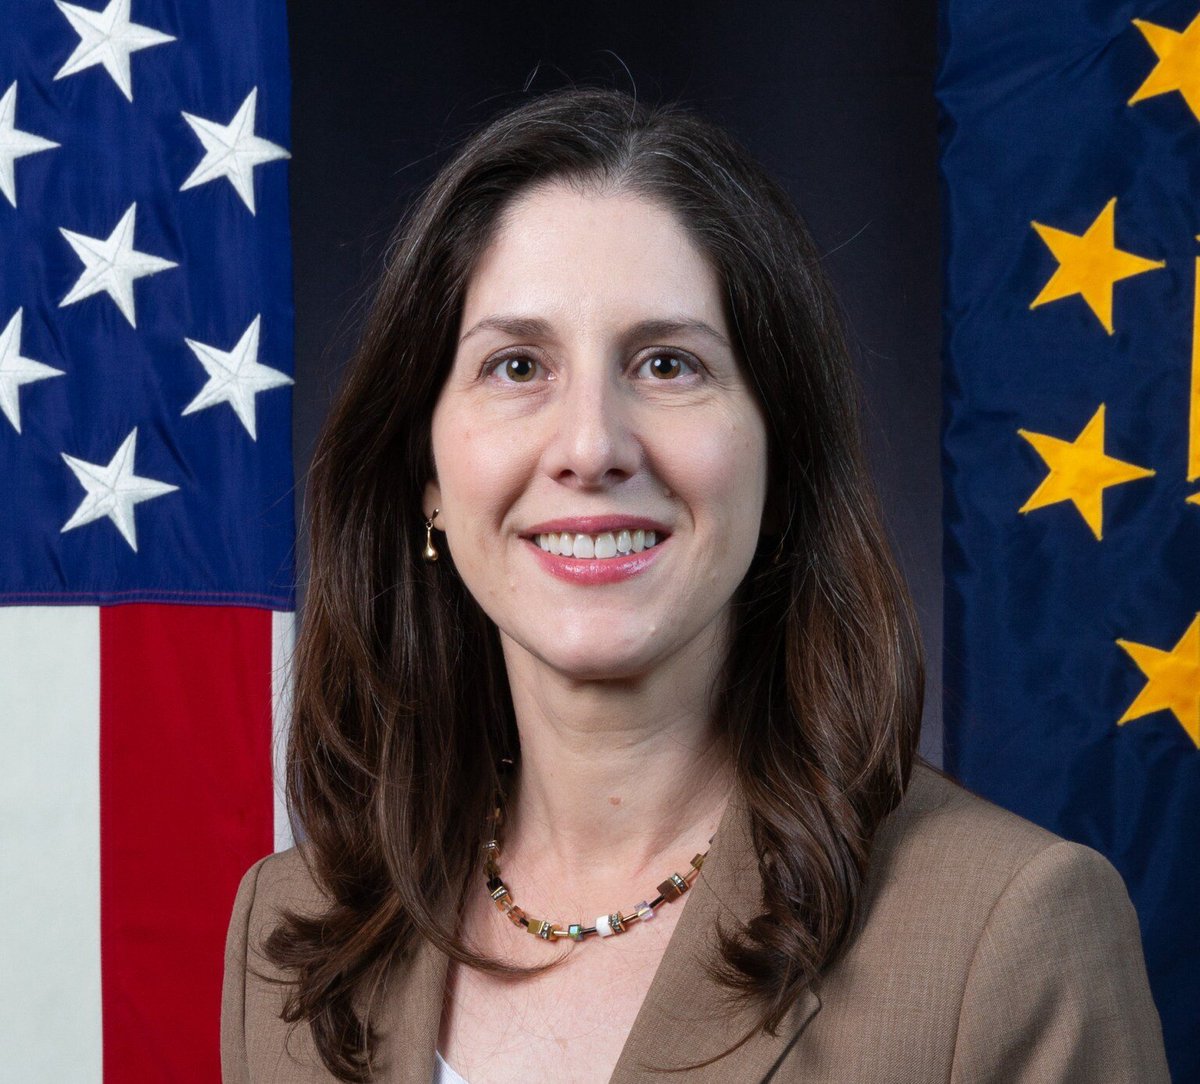 Anne Marie Schumann was sworn in Monday as the second-ever principal cyber adviser for the Department of the Navy, according to an announcement. scoopmedia.co/4aPKkaH